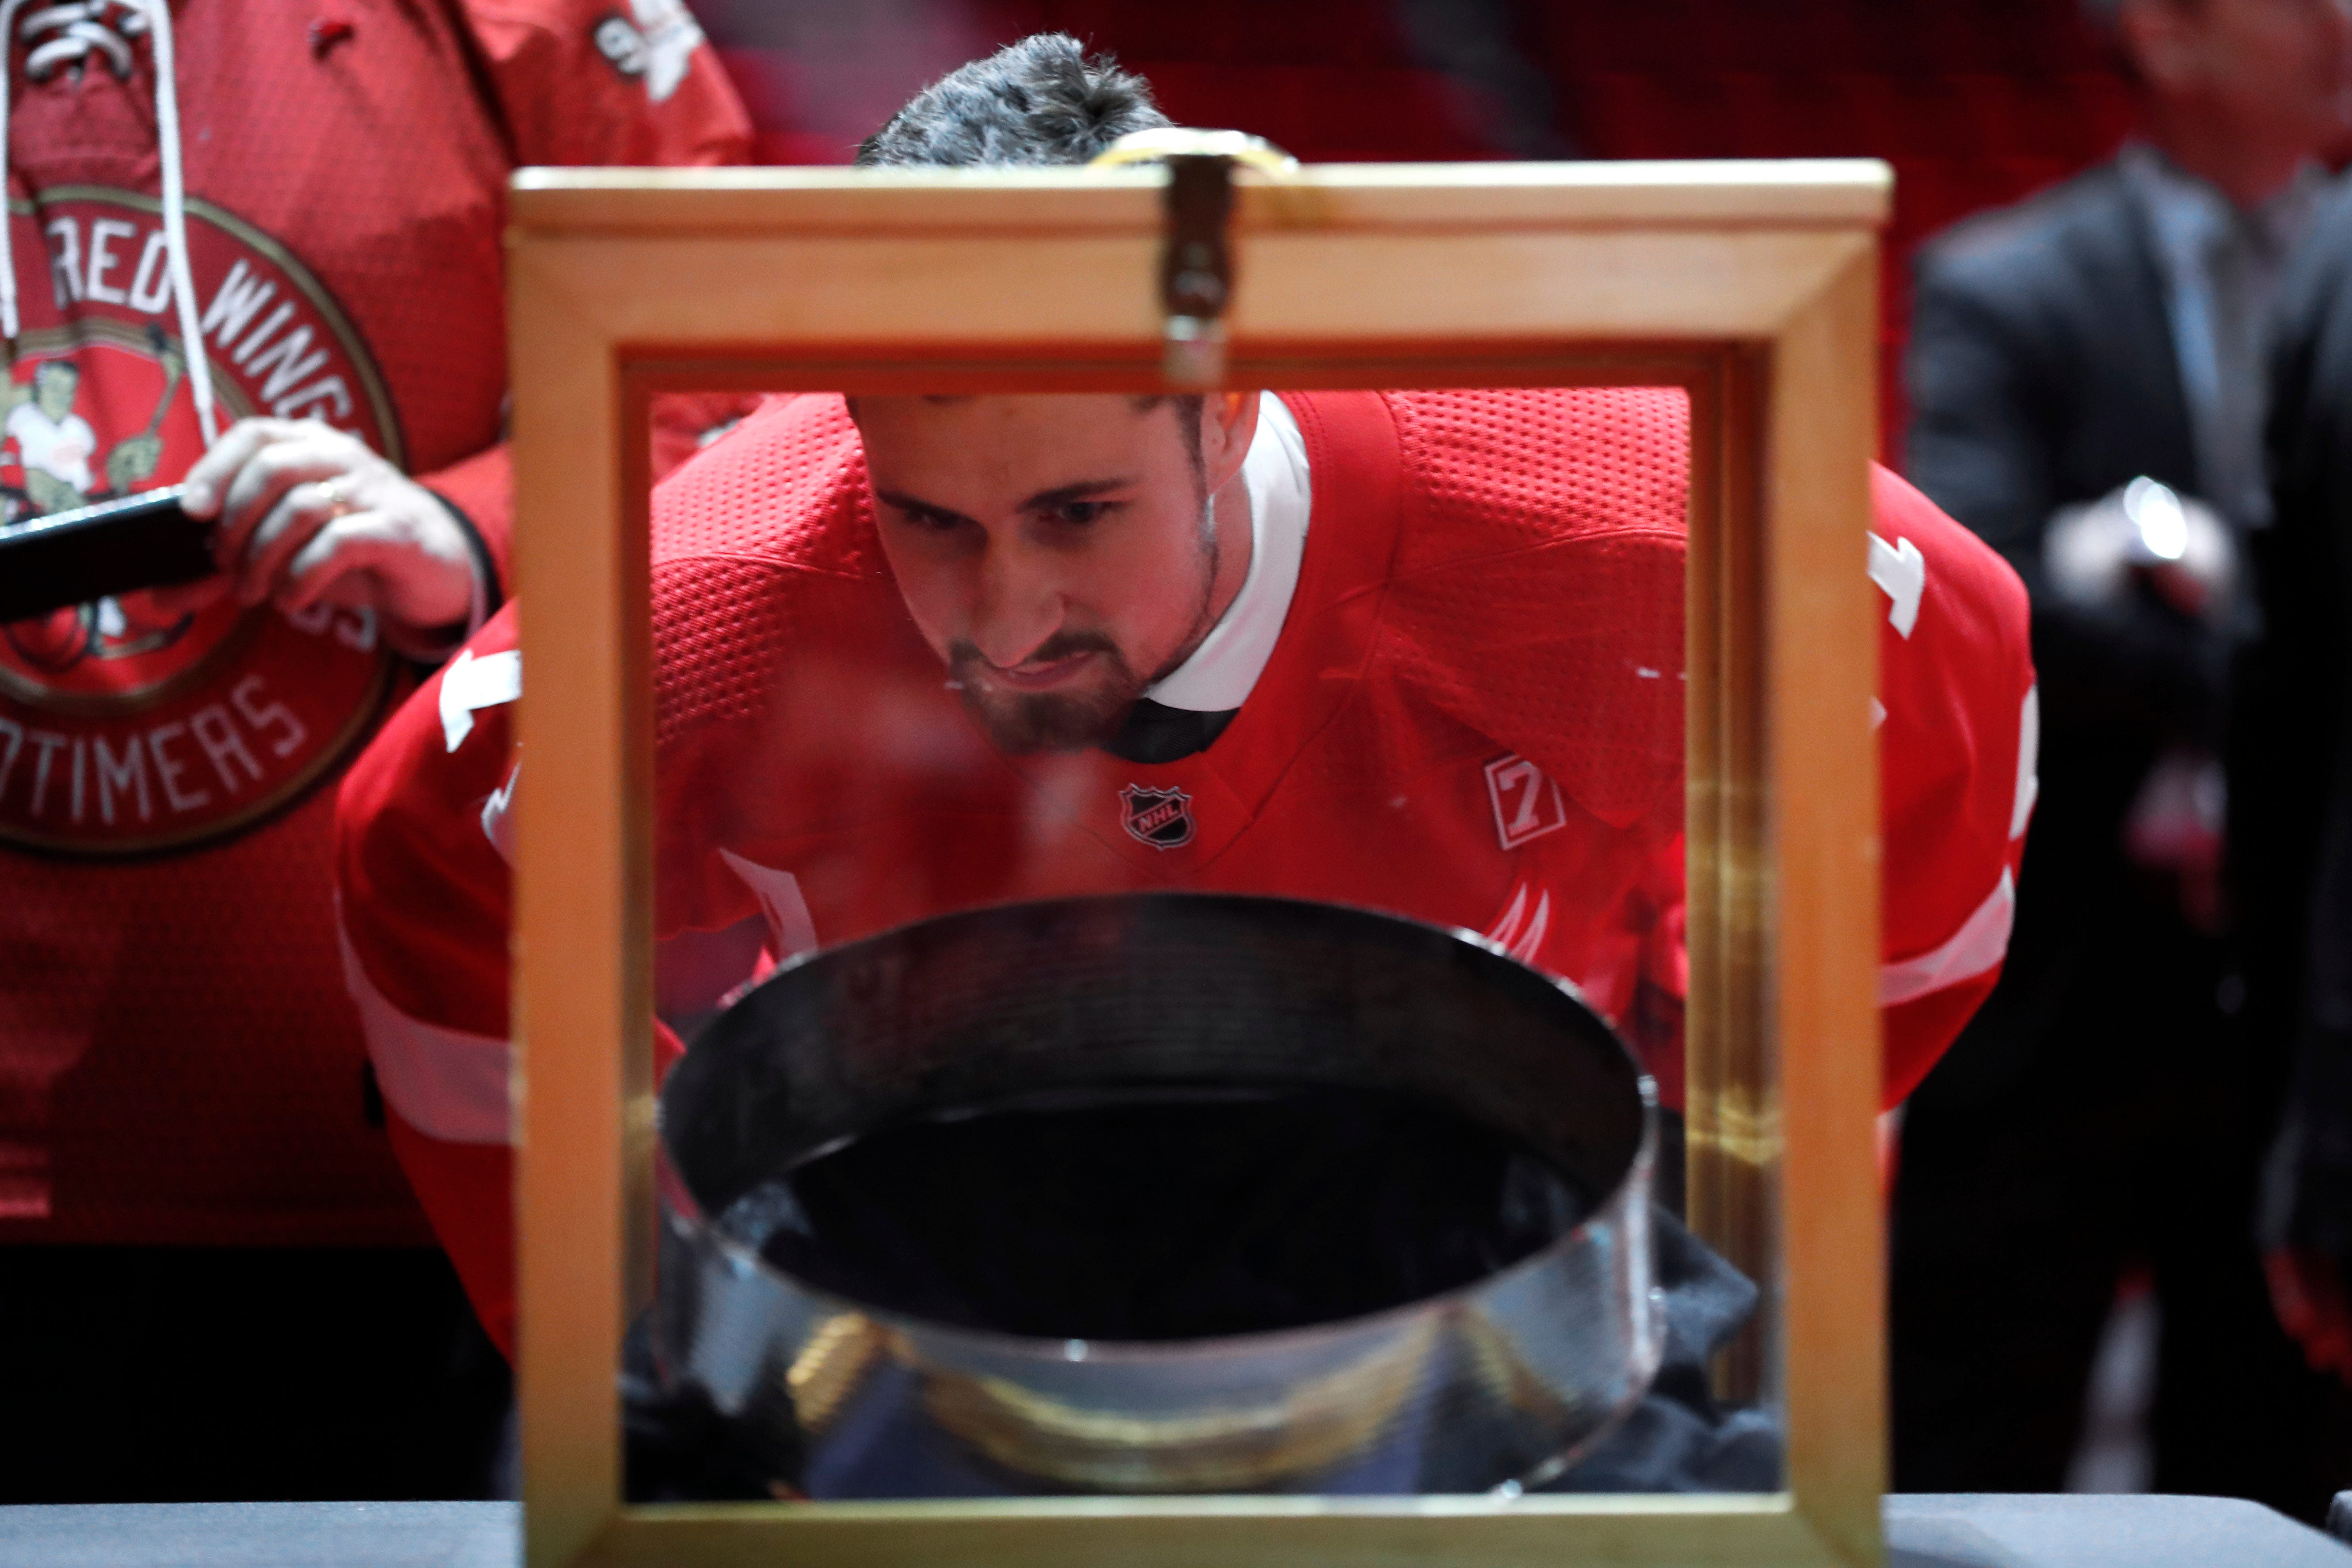 Detroit Red Wings center Dylan Larkin views a ring of the Stanley Cup during the public viewing. Every 12 years a ring is removed from the Stanley Cup, to make room for the names of new champions.